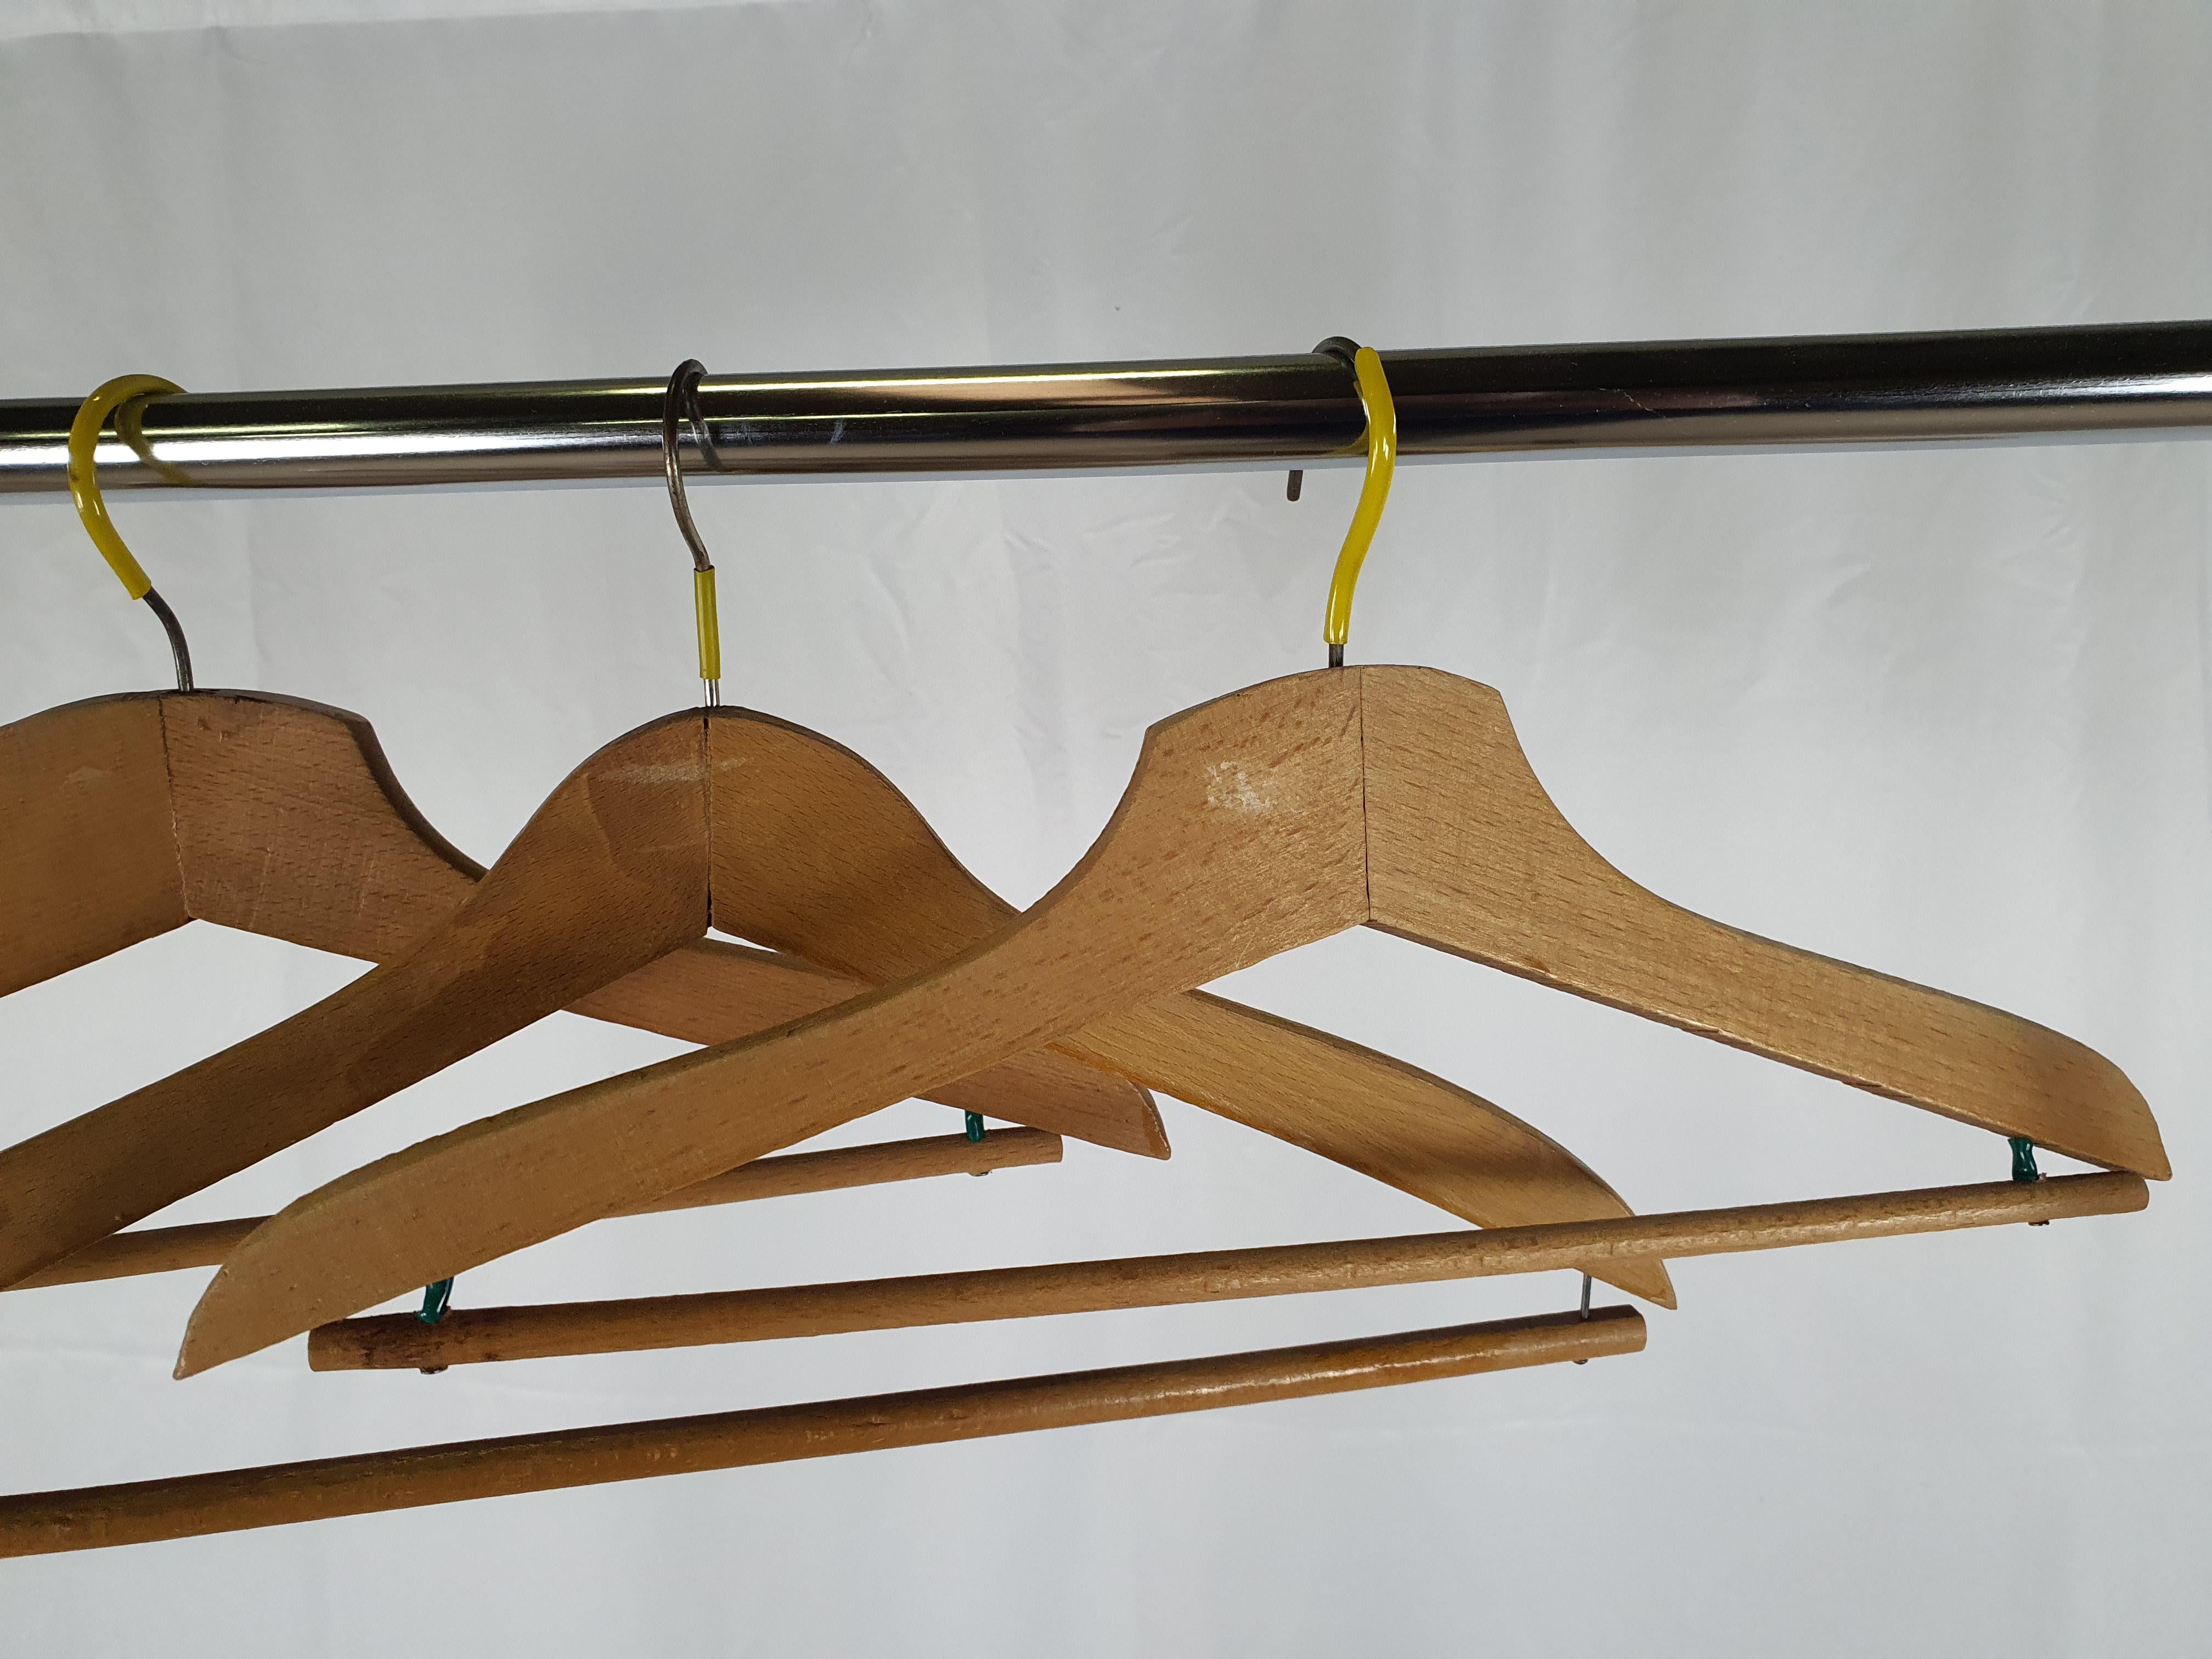 Set of three vintage hangers from the 1950s, entirely in wood with iron hanger.

Solid and robust, they can also be used as furnishing and design elements hung in various rooms of the house.